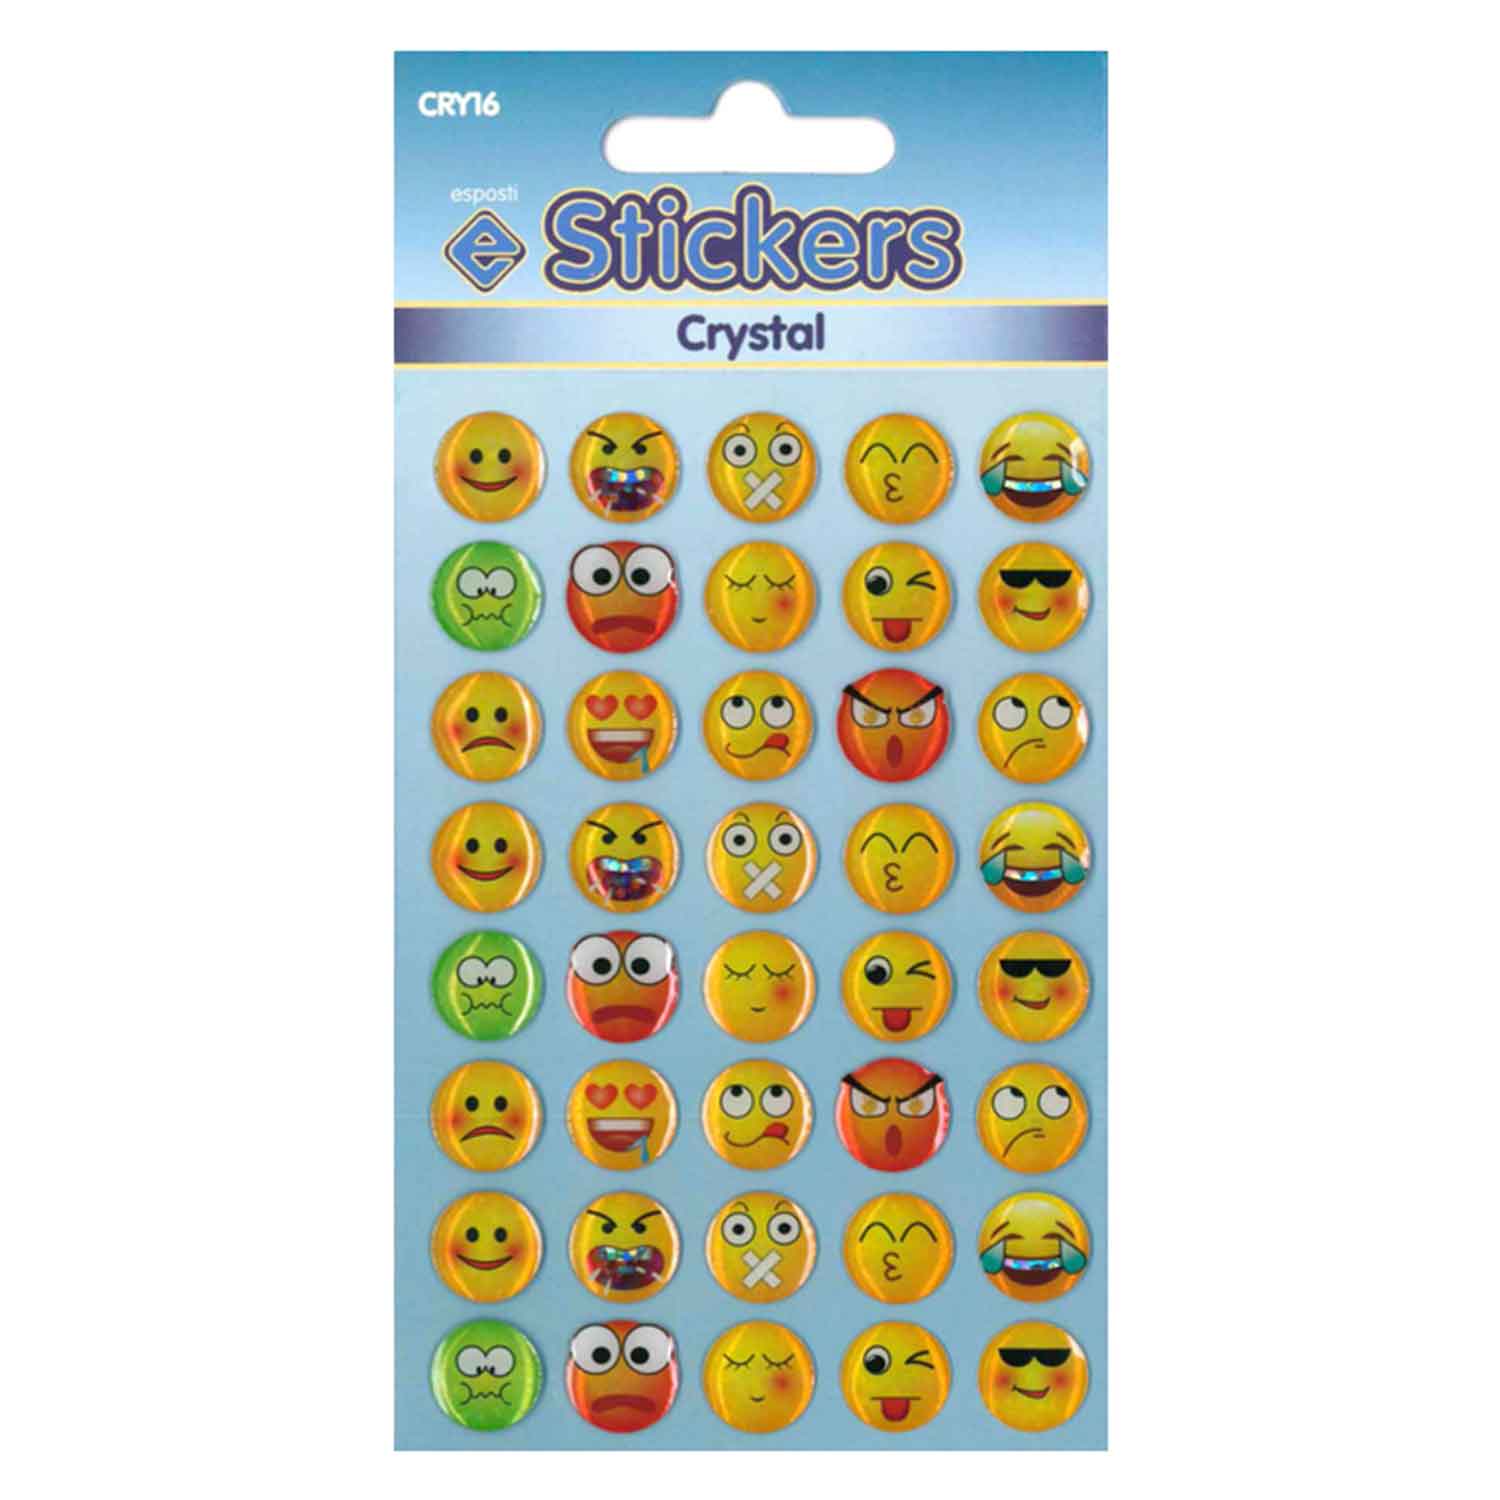 Emoticons Self Adhesive Novelty Stickers - Pack of 10